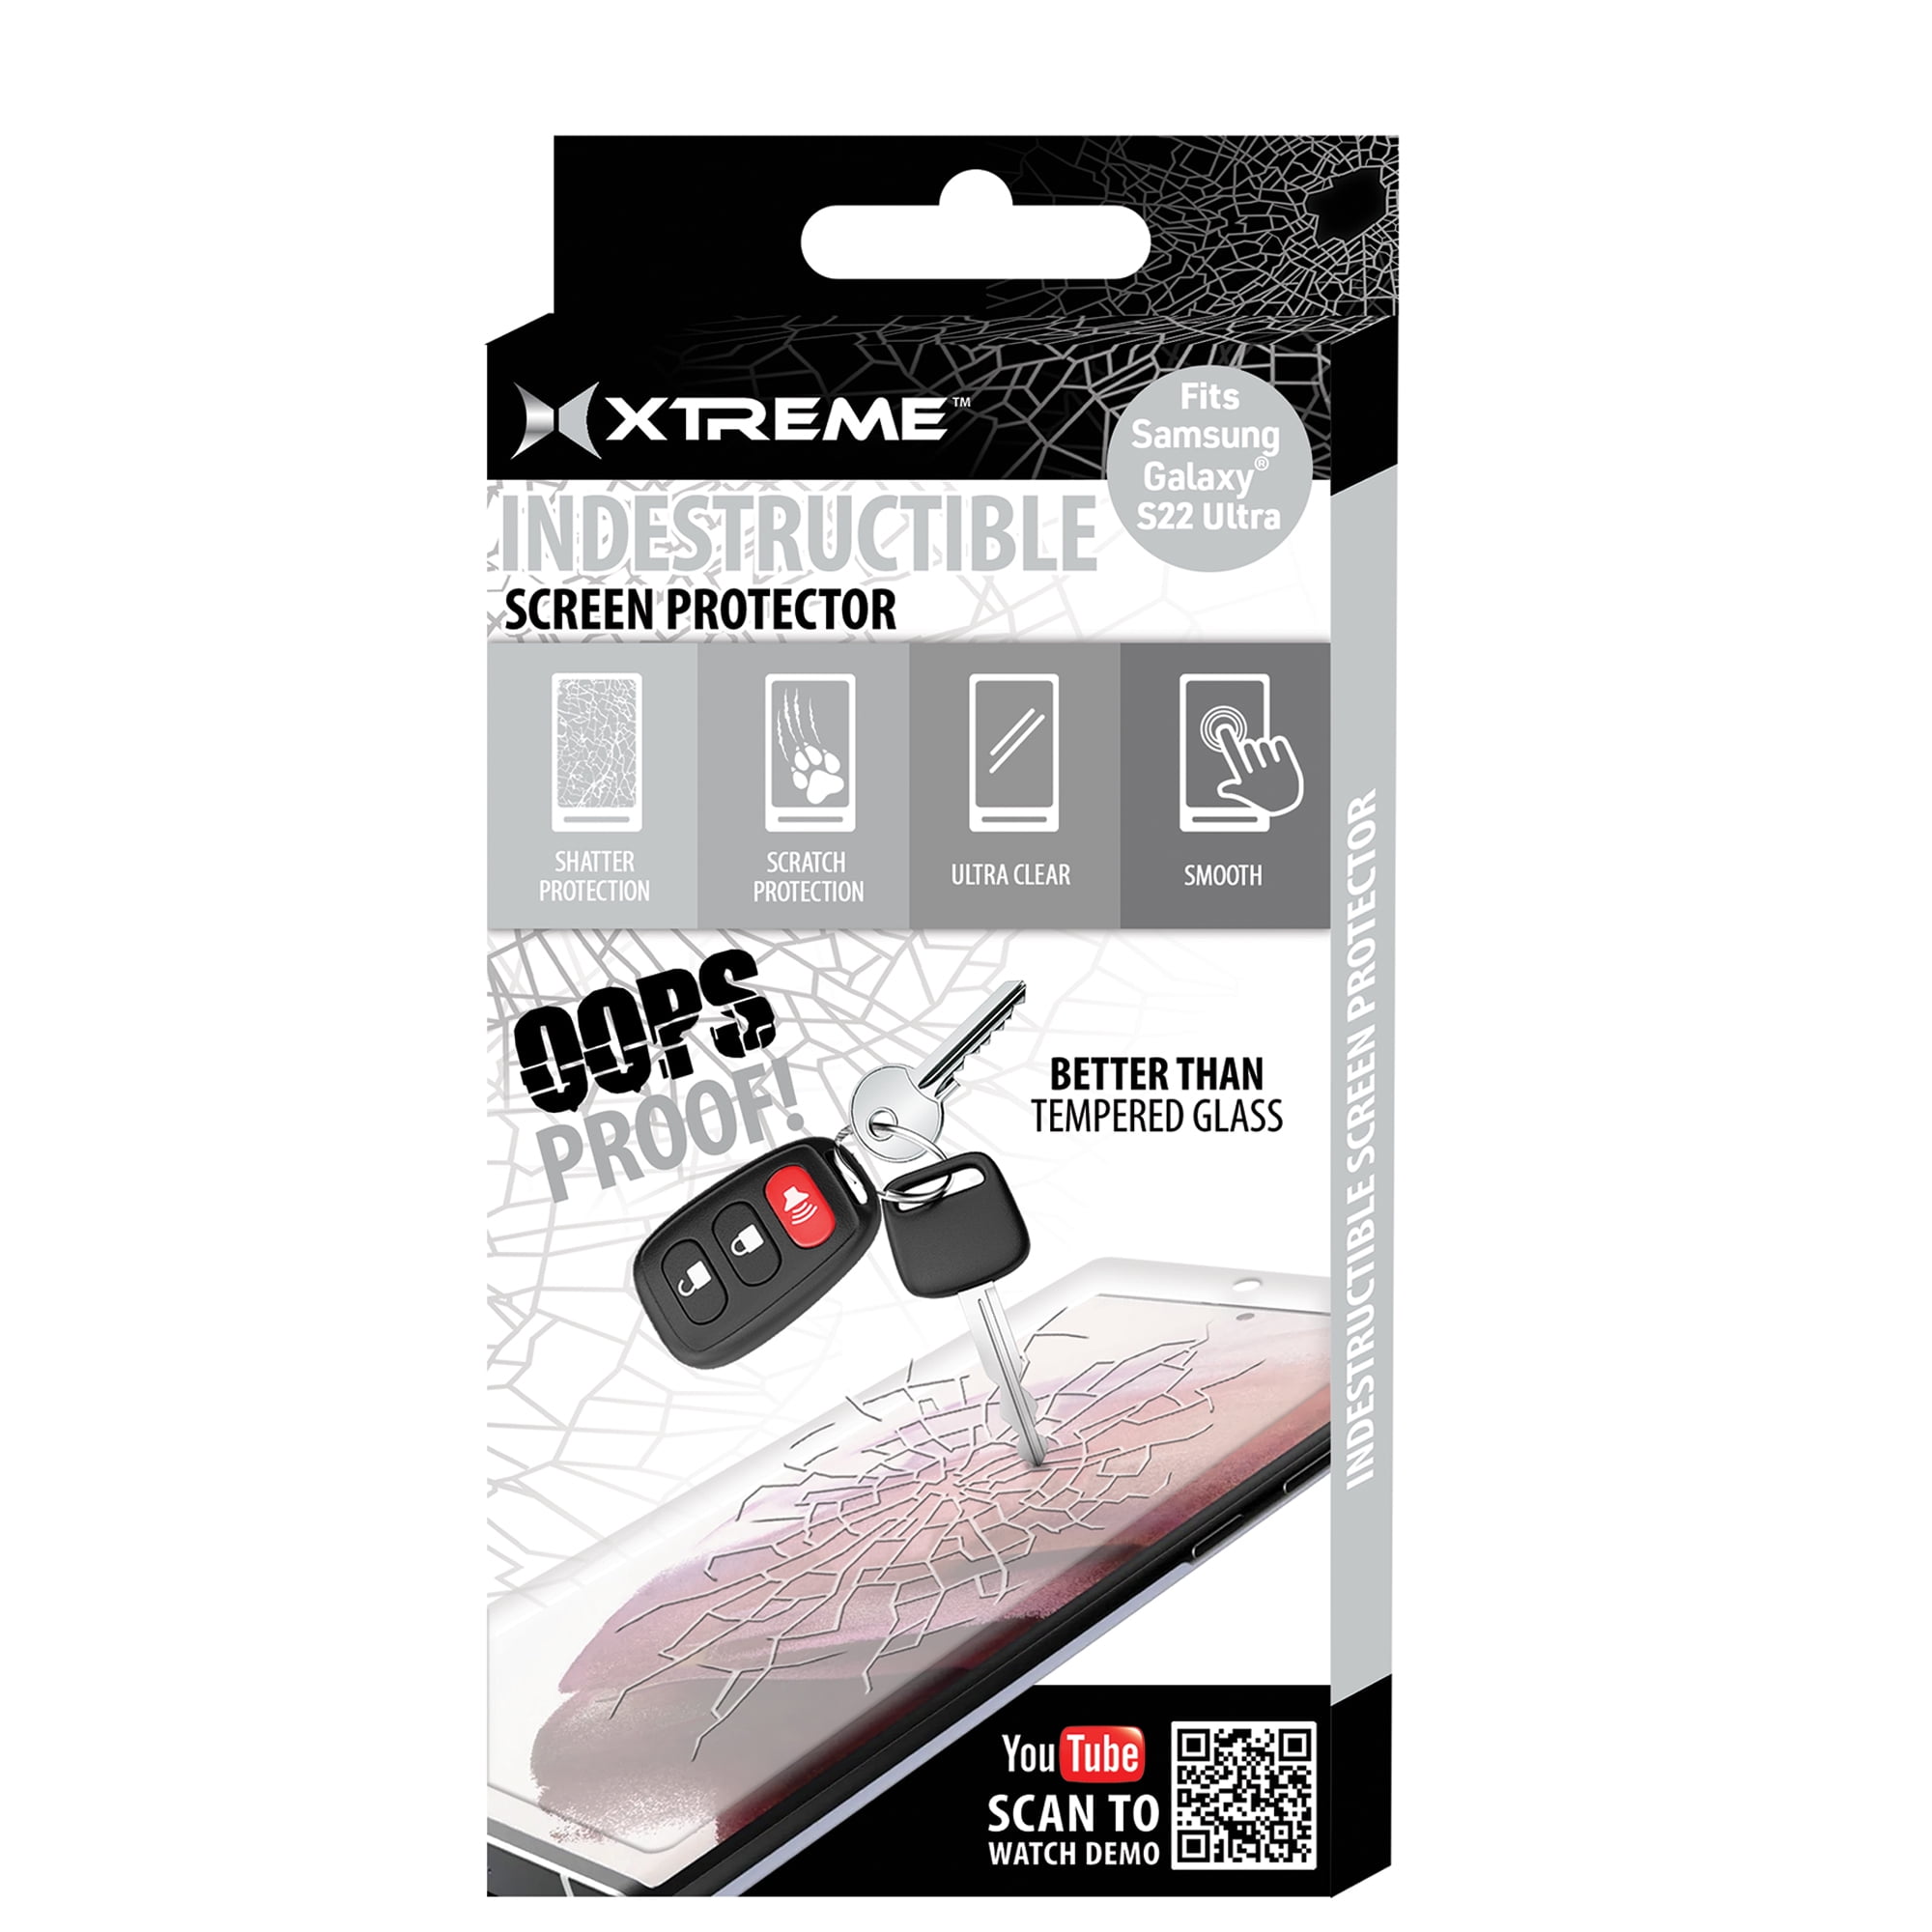 Xtreme Samsung Galaxy S22 Ultra Indestructible Screen Protector, Prevents  Shattered Screen 